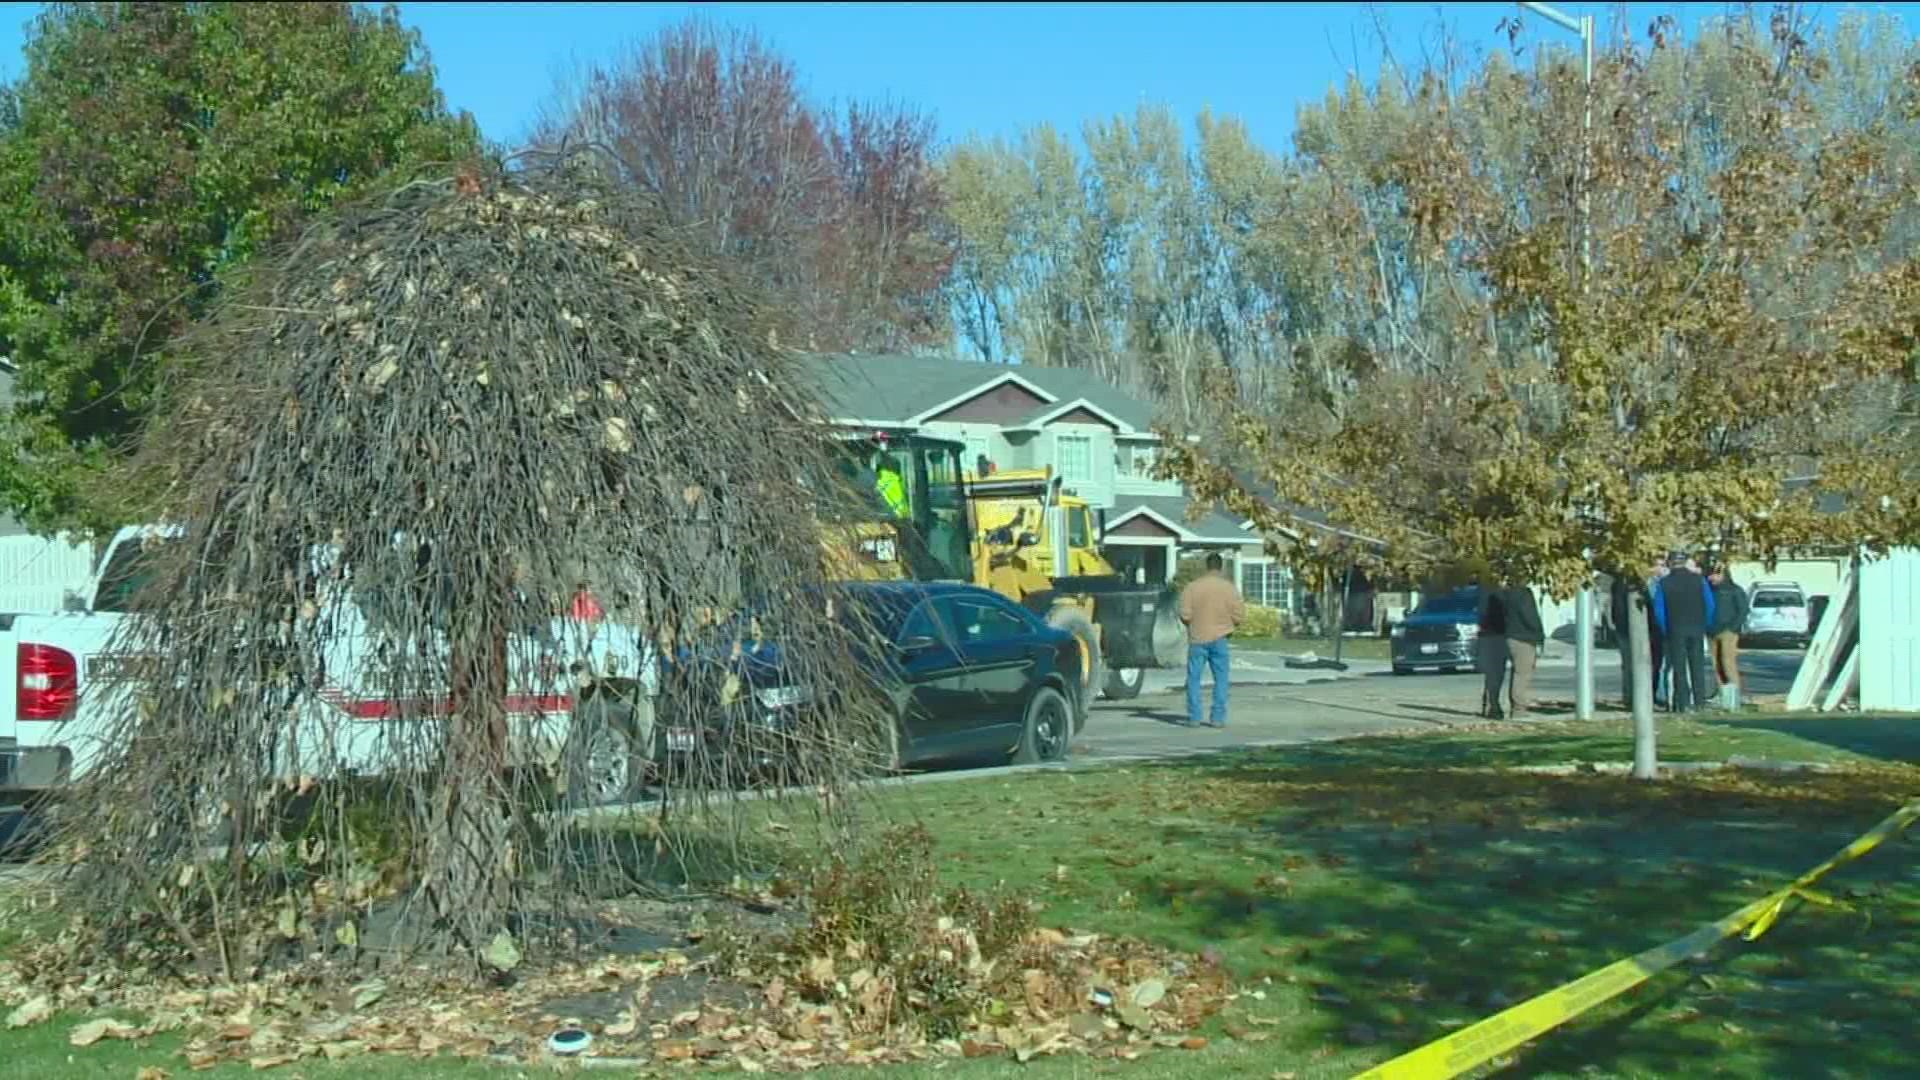 Fruitland Police Chief J.D. Huff told KTVB search crews finished processing the entire home and yard off Redwing Street Wednesday.